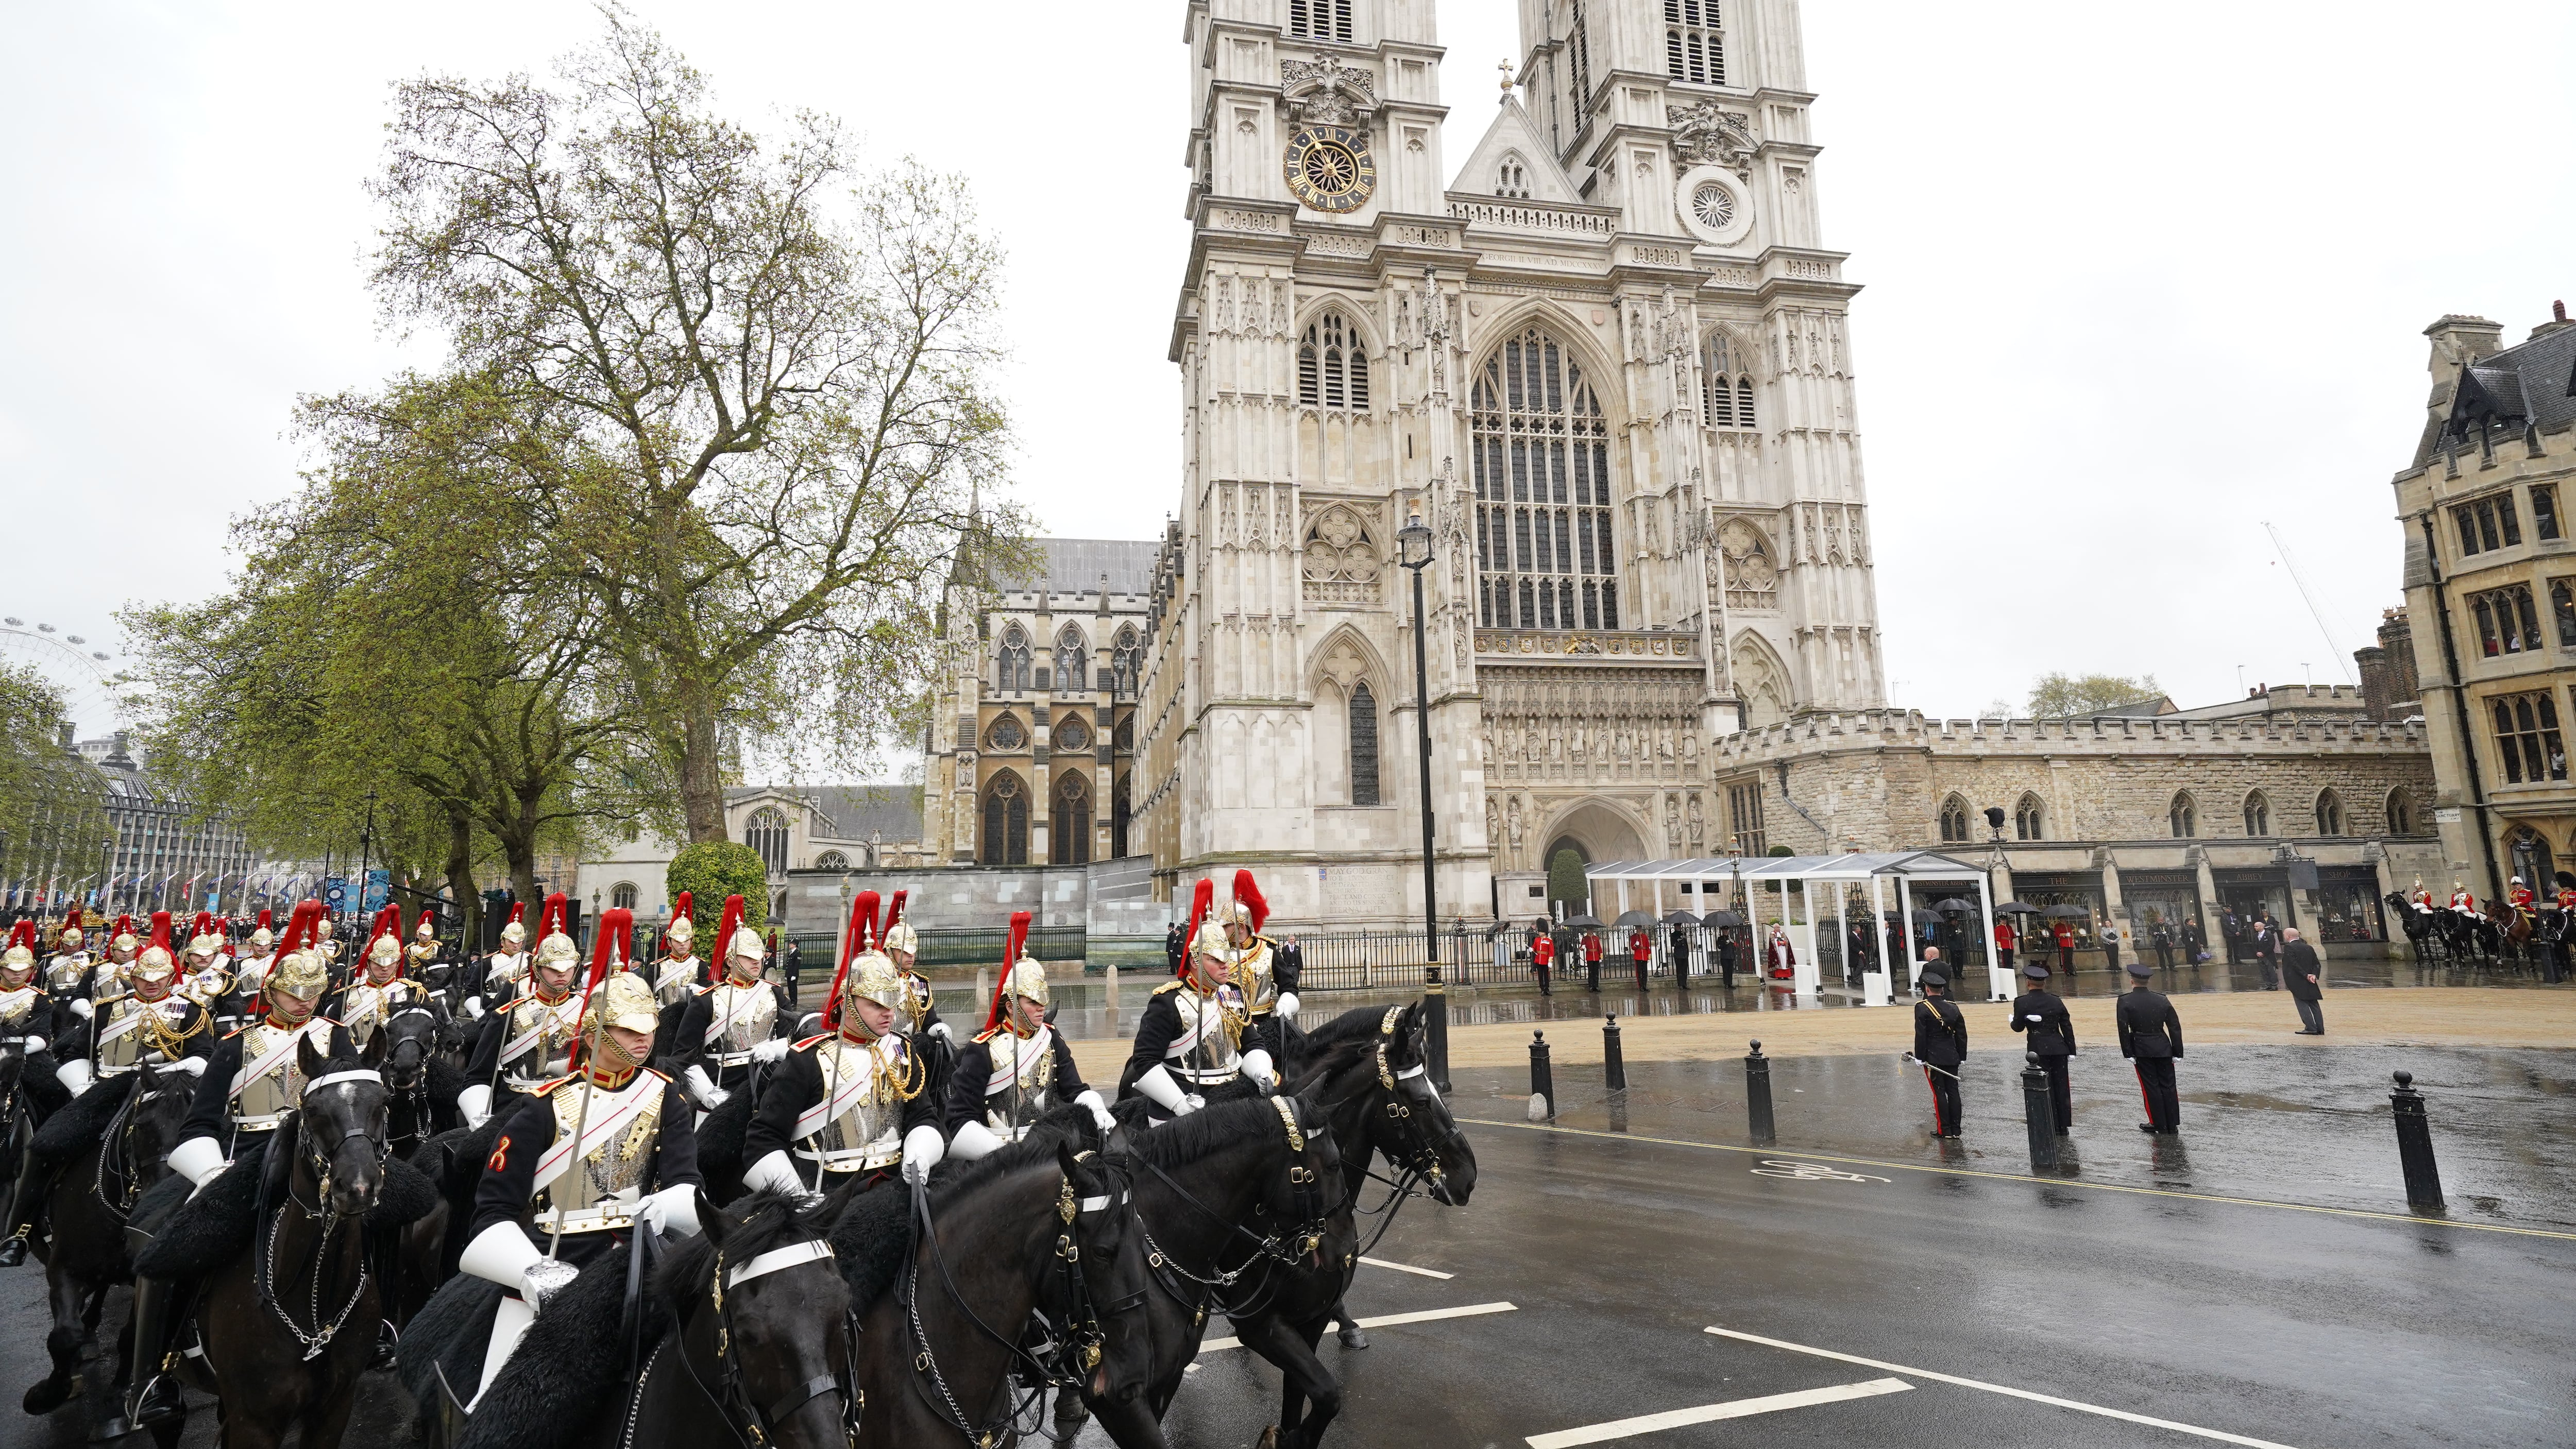 The visitor experience at Westminster Abbey is to be transformed allowing the public to enter via the Great West Door